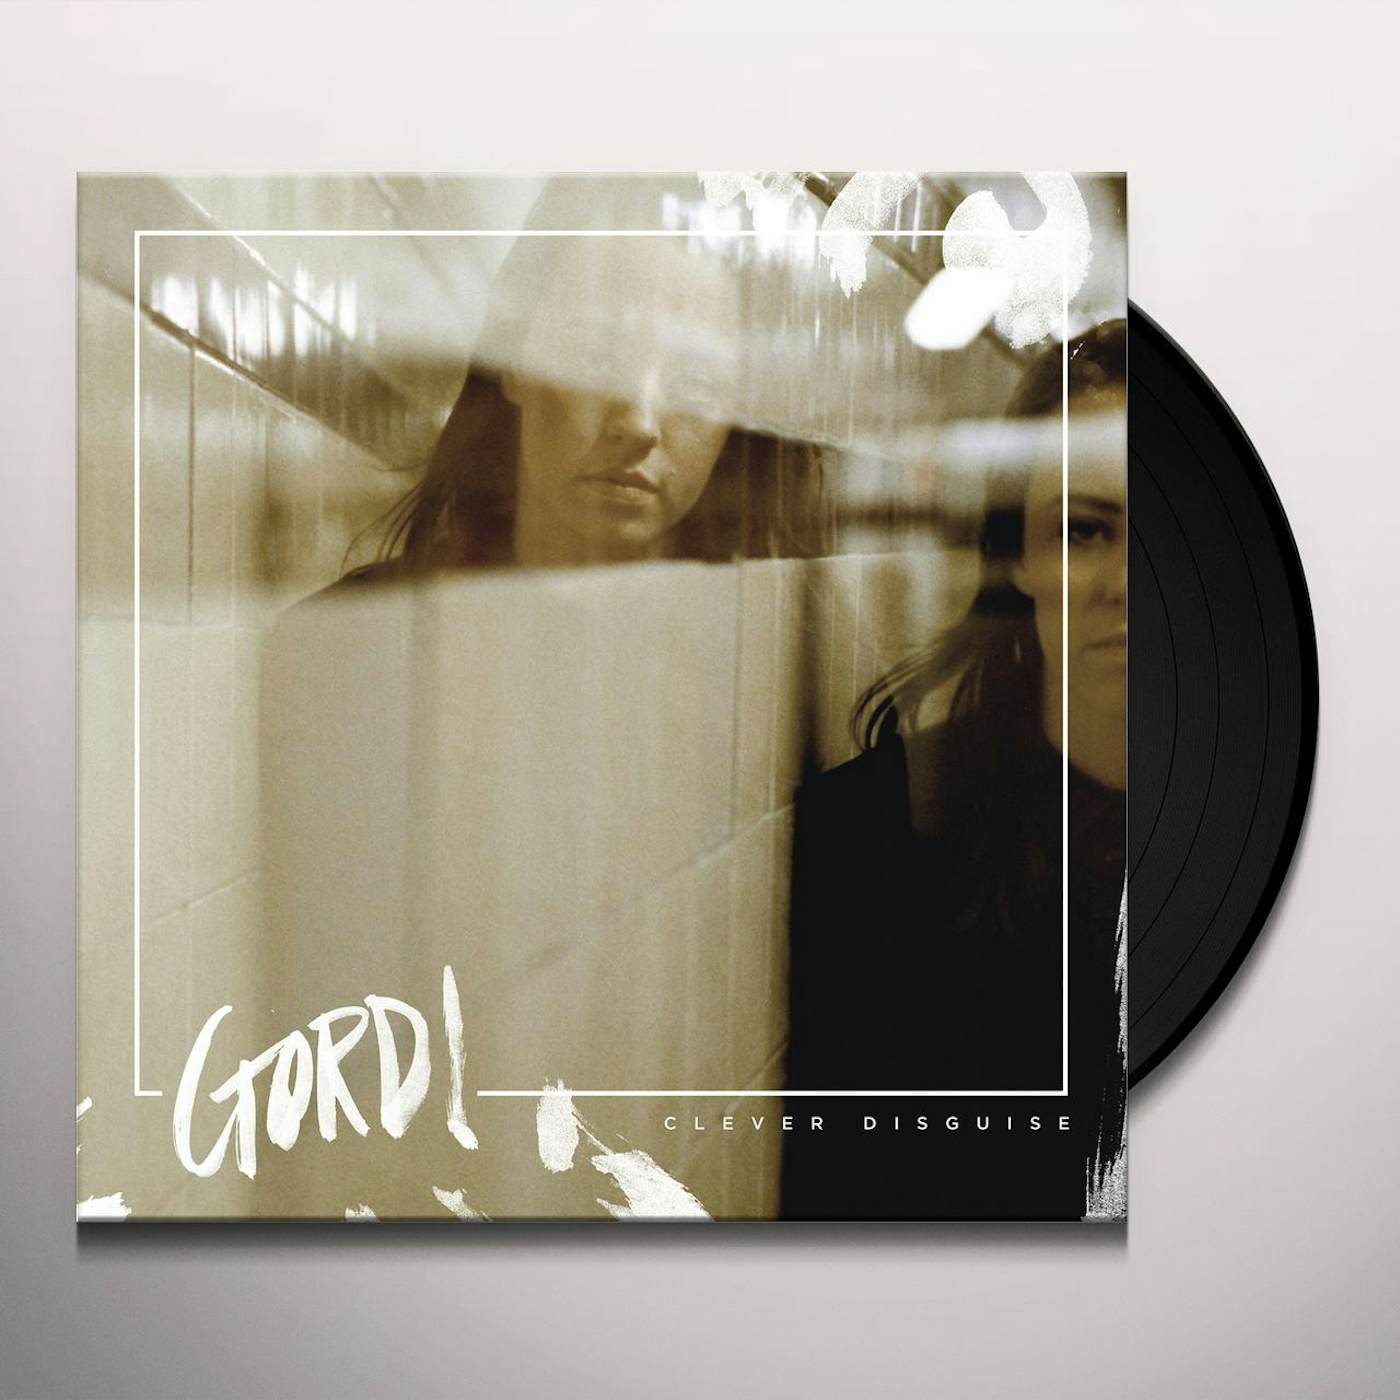 Gordi Clever Disguise Vinyl Record